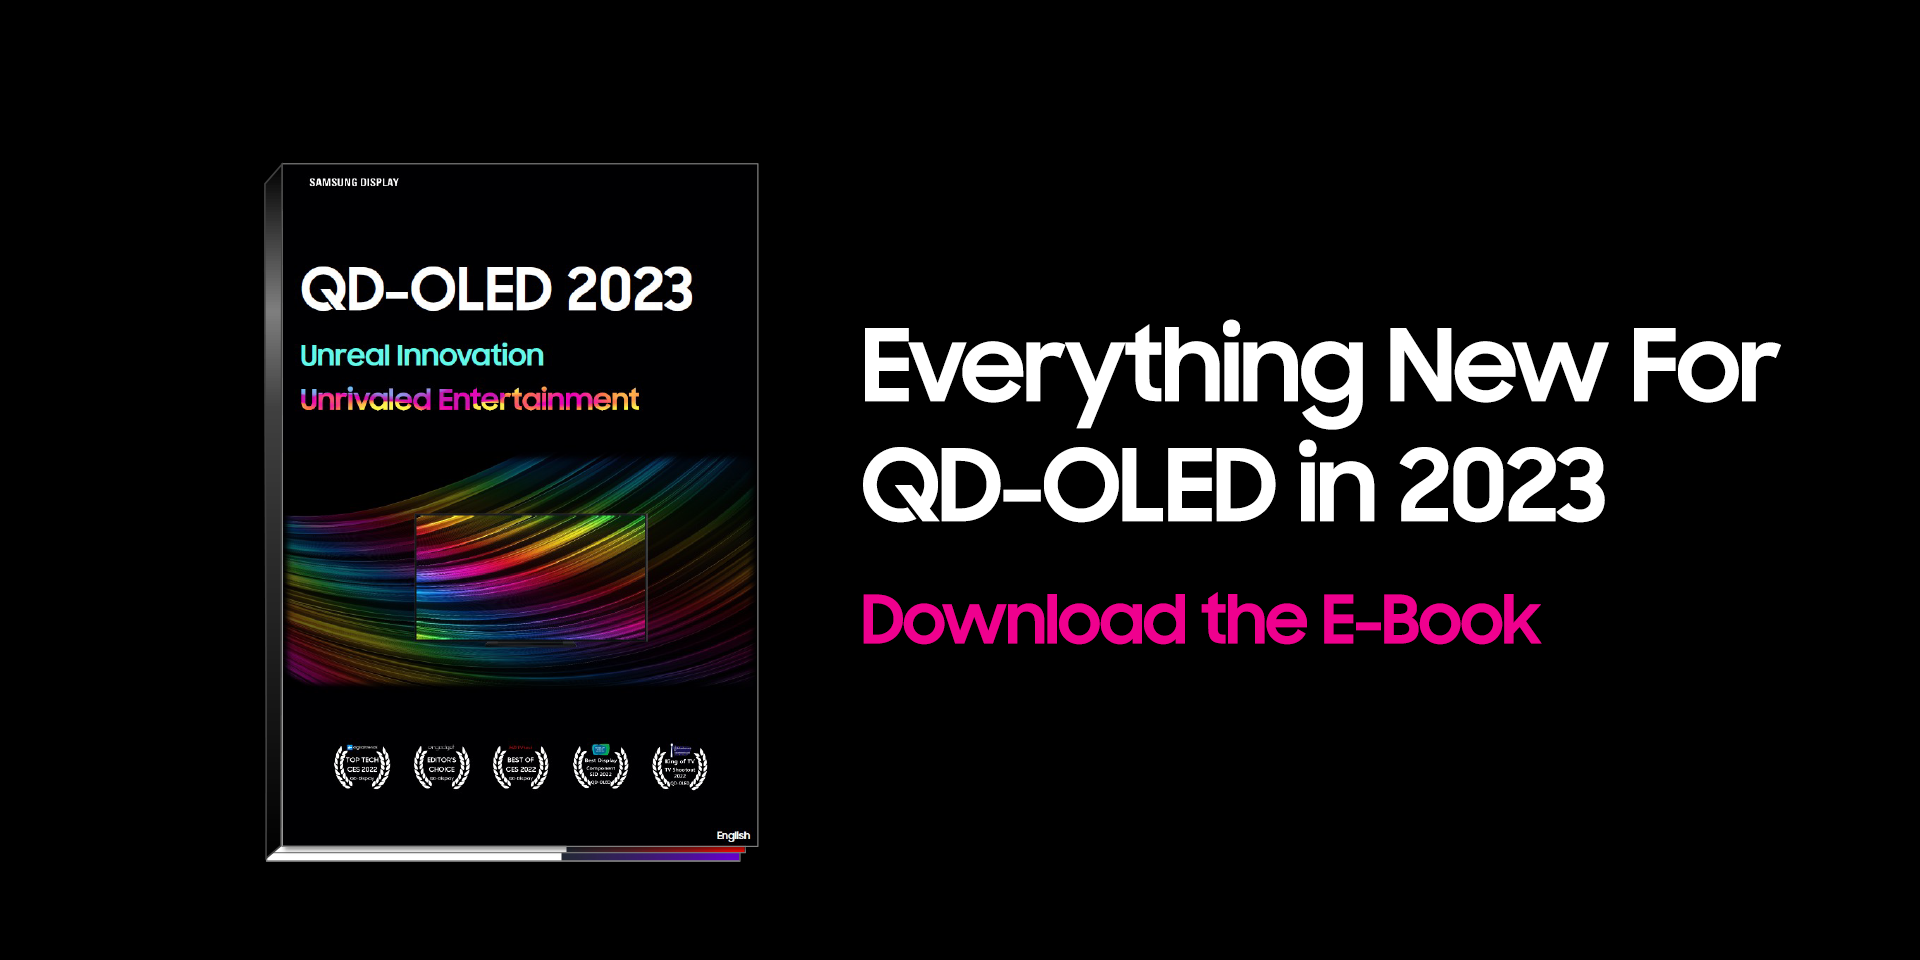 Everything New for QD-OLED in 2023